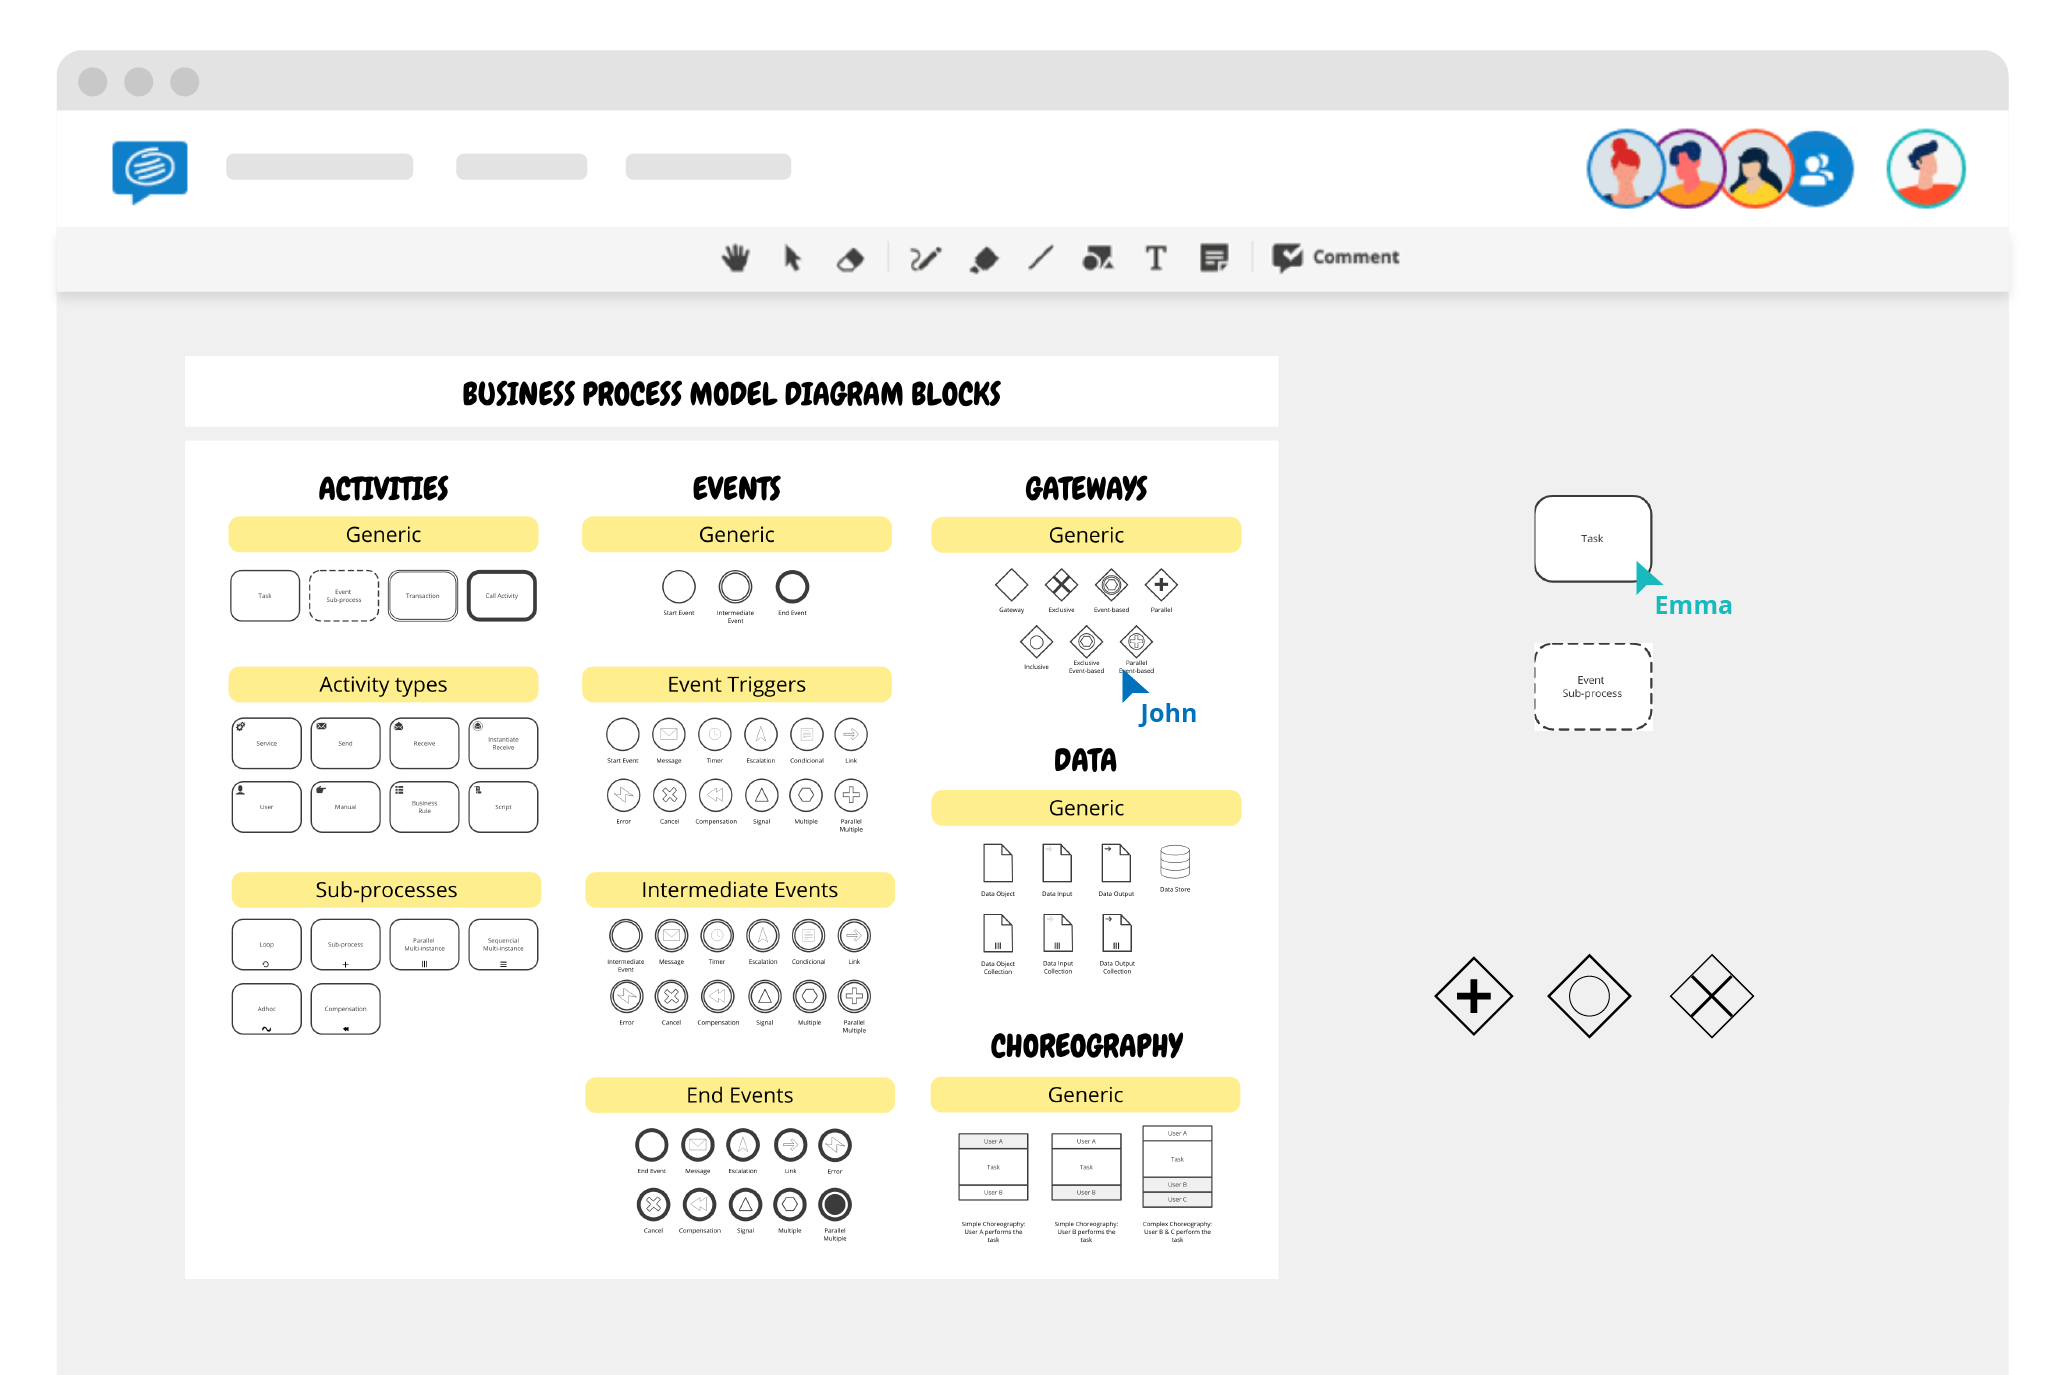 Conceptboard app BPMN Process modelling with building blocks